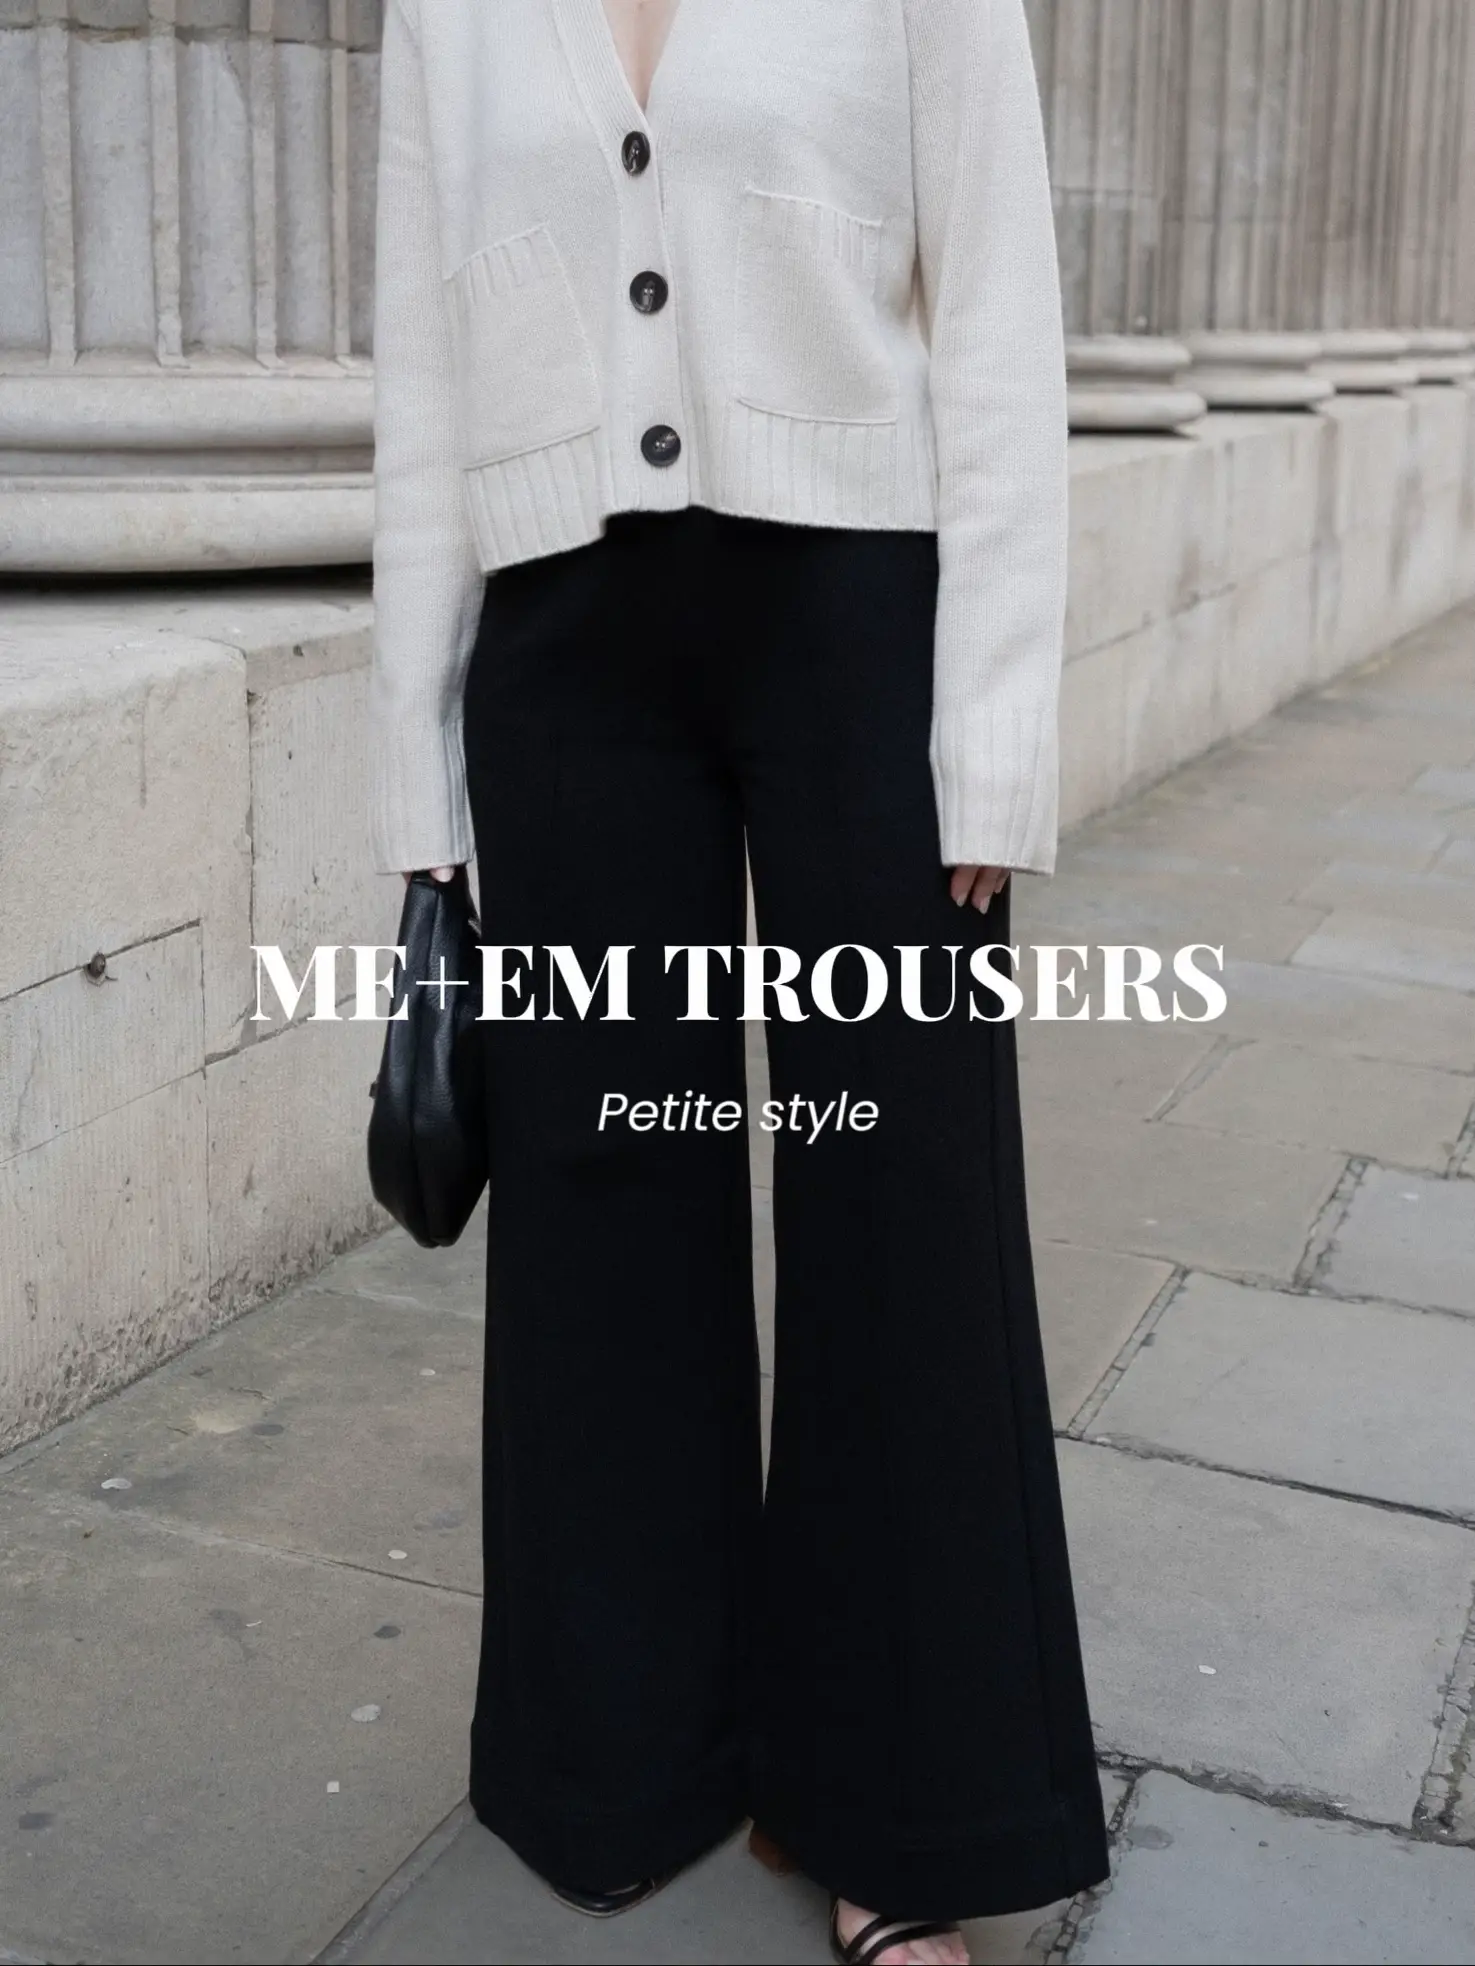 ME+EM trousers review ✨ Petite style, Gallery posted by Sarah Mantelin